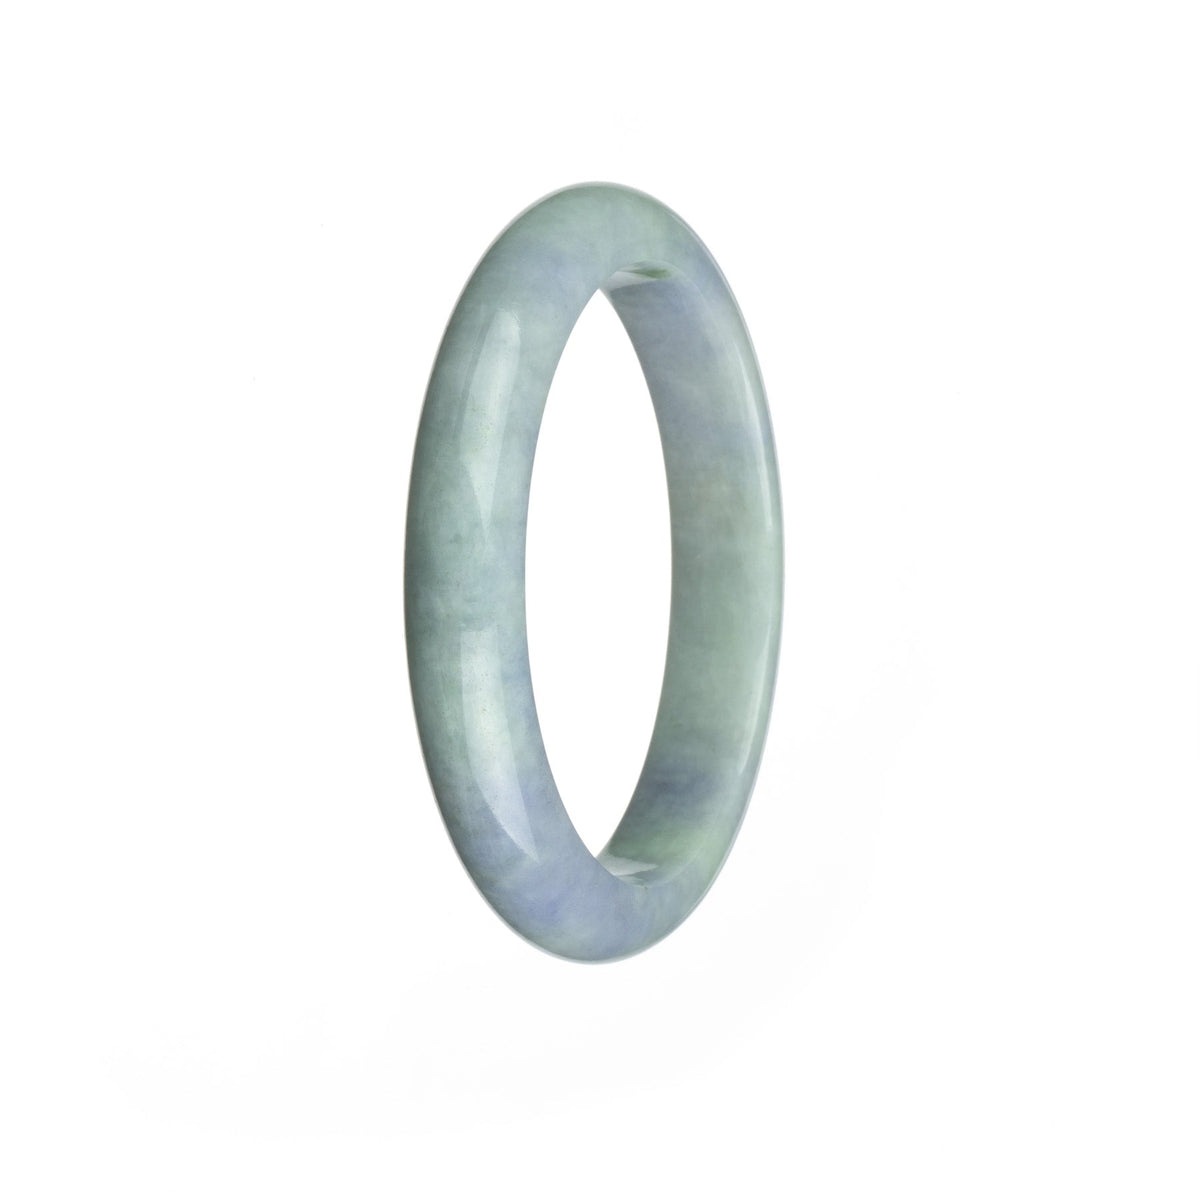 A lavender Burma jade bangle bracelet with a semi-round shape, measuring 57mm. Certified as Type A jade by MAYS™.